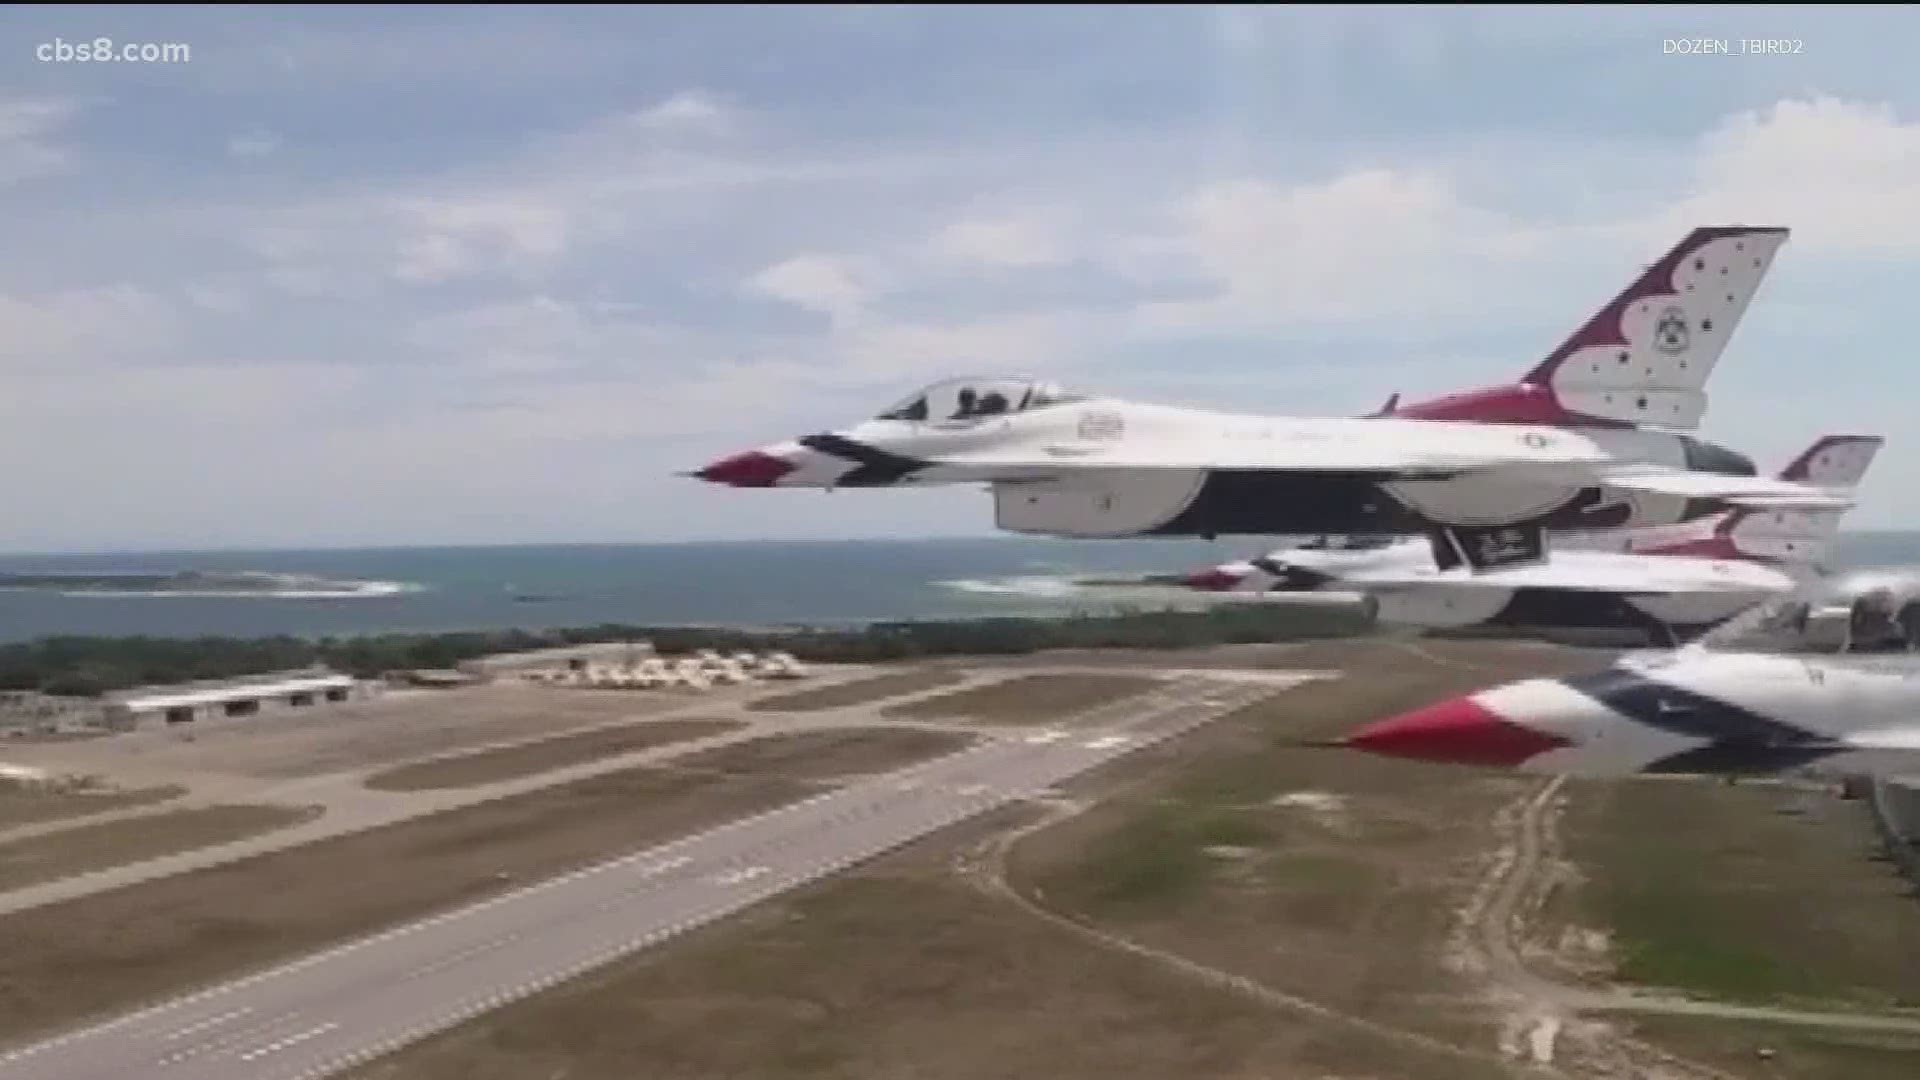 U.S. Airforce Squadron, the Thunderbirds, will fly over San Diego on